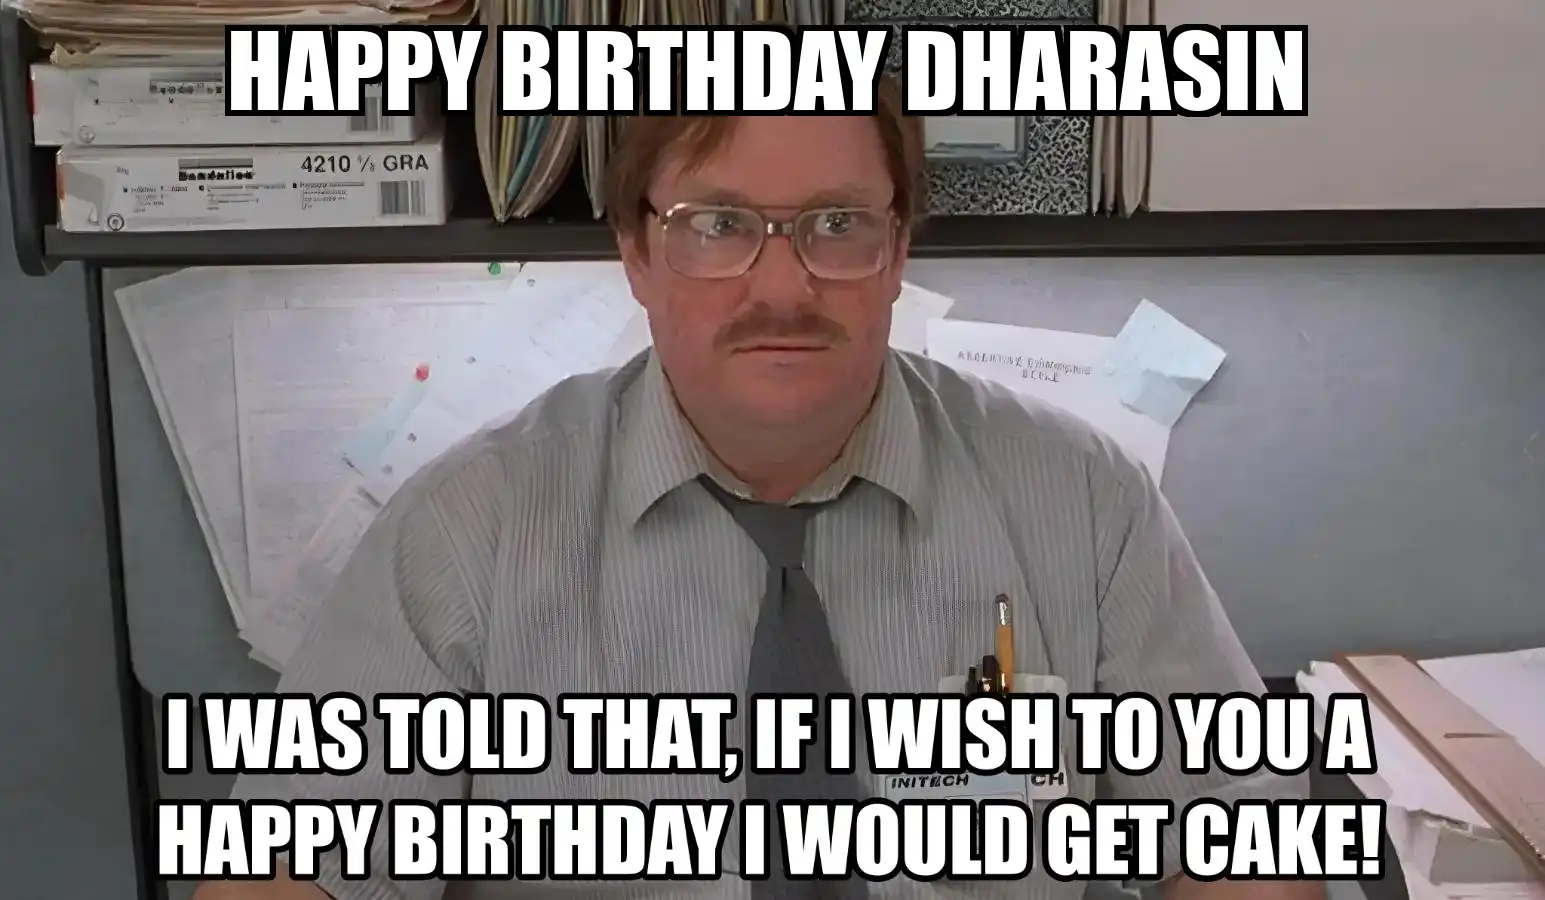 Happy Birthday Dharasin I Would Get A Cake Meme